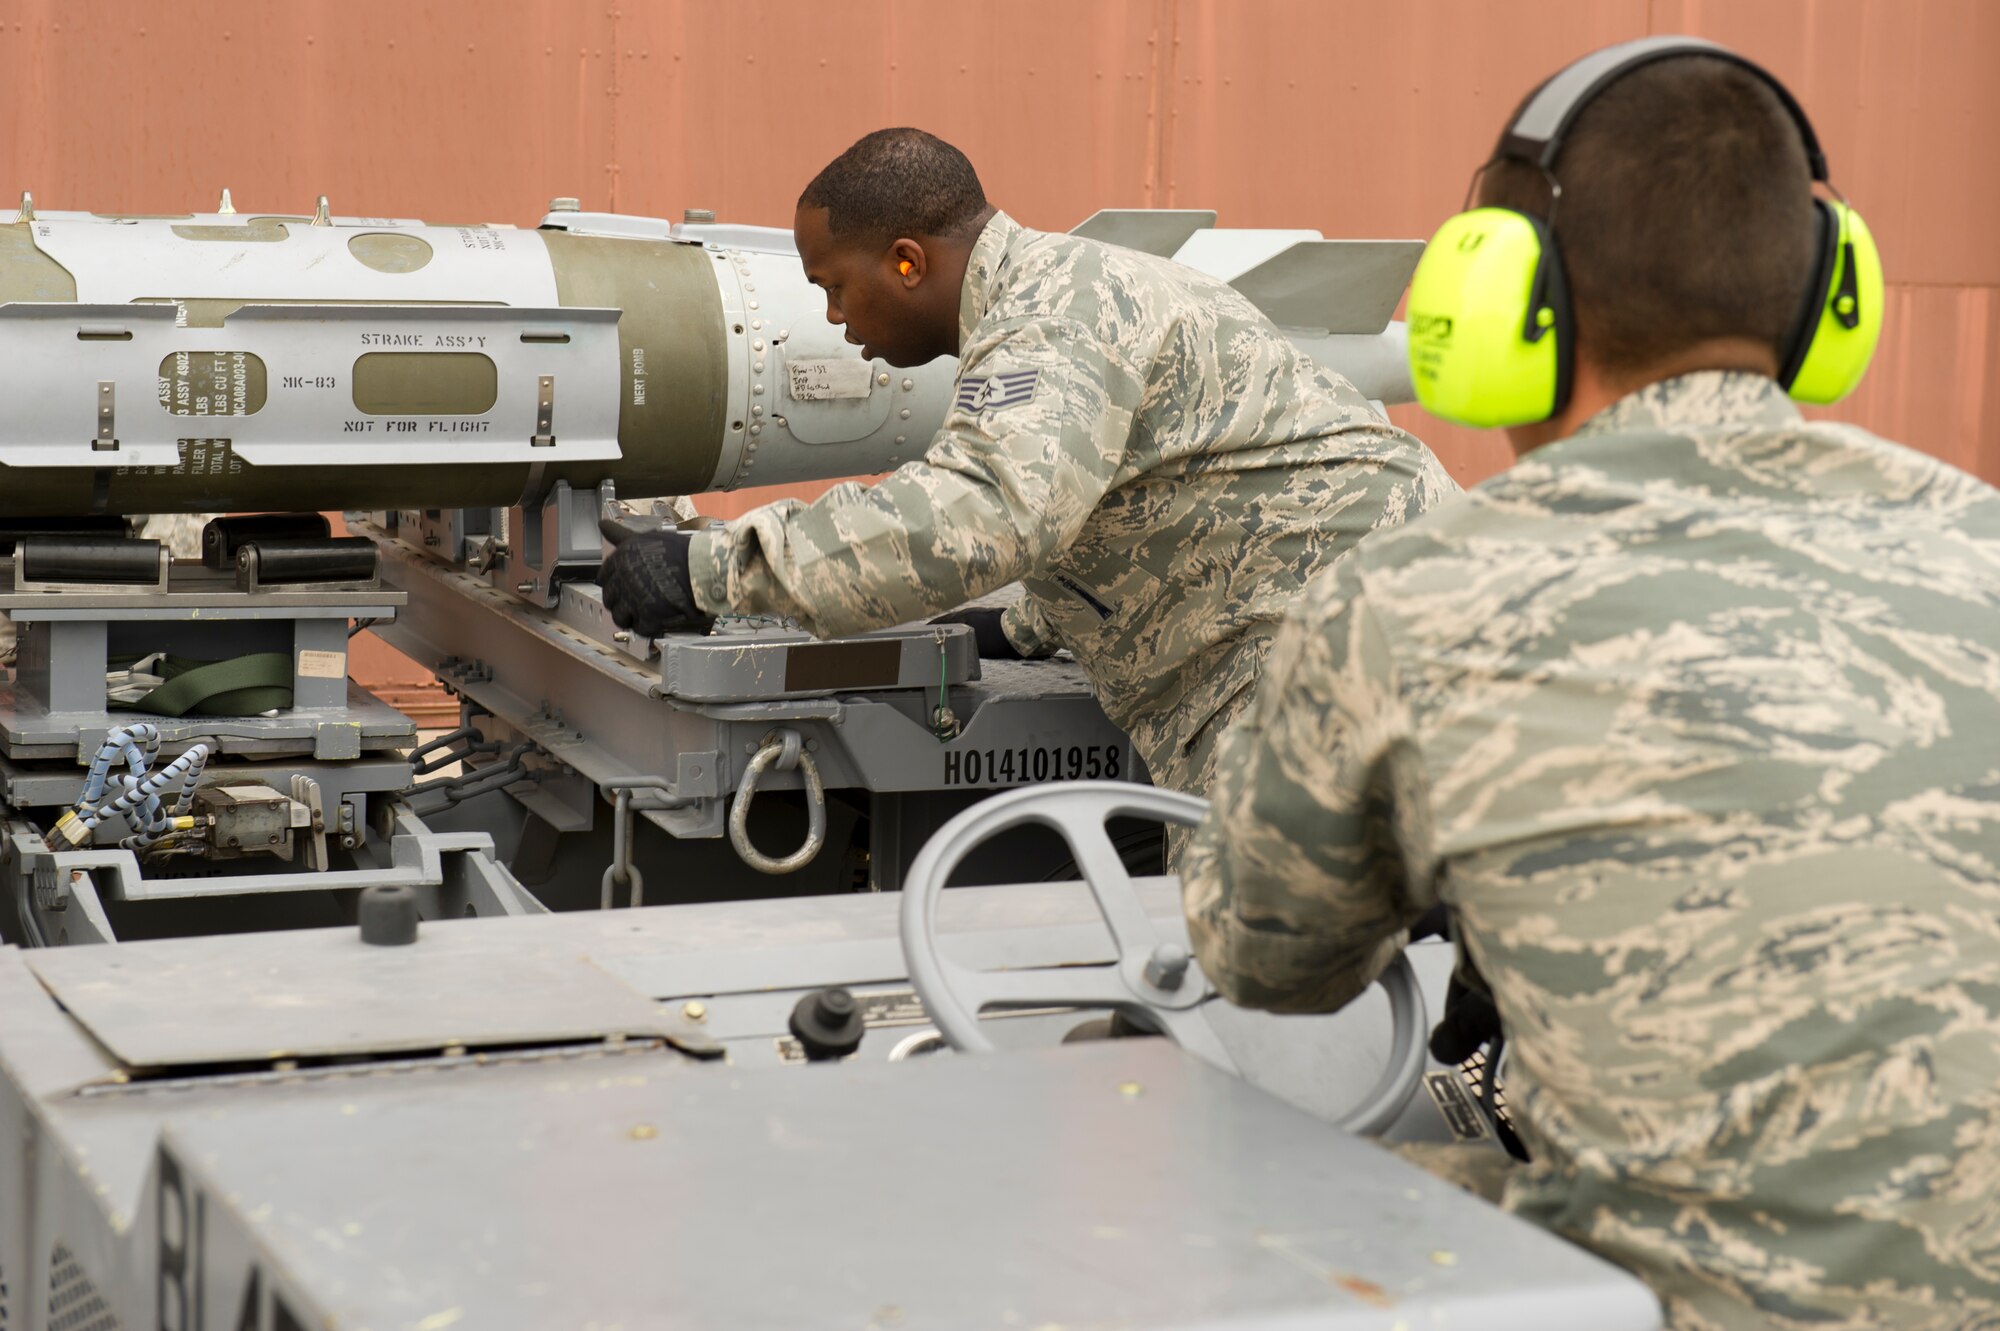 Staff Sgt. Kevin Hagans, 49th Aircraft Maintenance Squadron load team member, directs Senior Airman Chad Davis, 49th Aircraft Maintenance Squadron load team member, while preparing to load a missile onto an F-22 Raptor aircraft during the quarterly load-crew competition at Holloman Air Force Base, N.M., April 5. The F-22 load-crew competed in the load-crew competition to have their skills evaluated alongside the MQ-9 Reaper aircraft and German Air Force load-crews. For the competition, points are awarded during the weapons loading, tool kit inspection, and uniform inspection. (U.S. Air Force photo by Airman 1st Class Michael Shoemaker/Released)